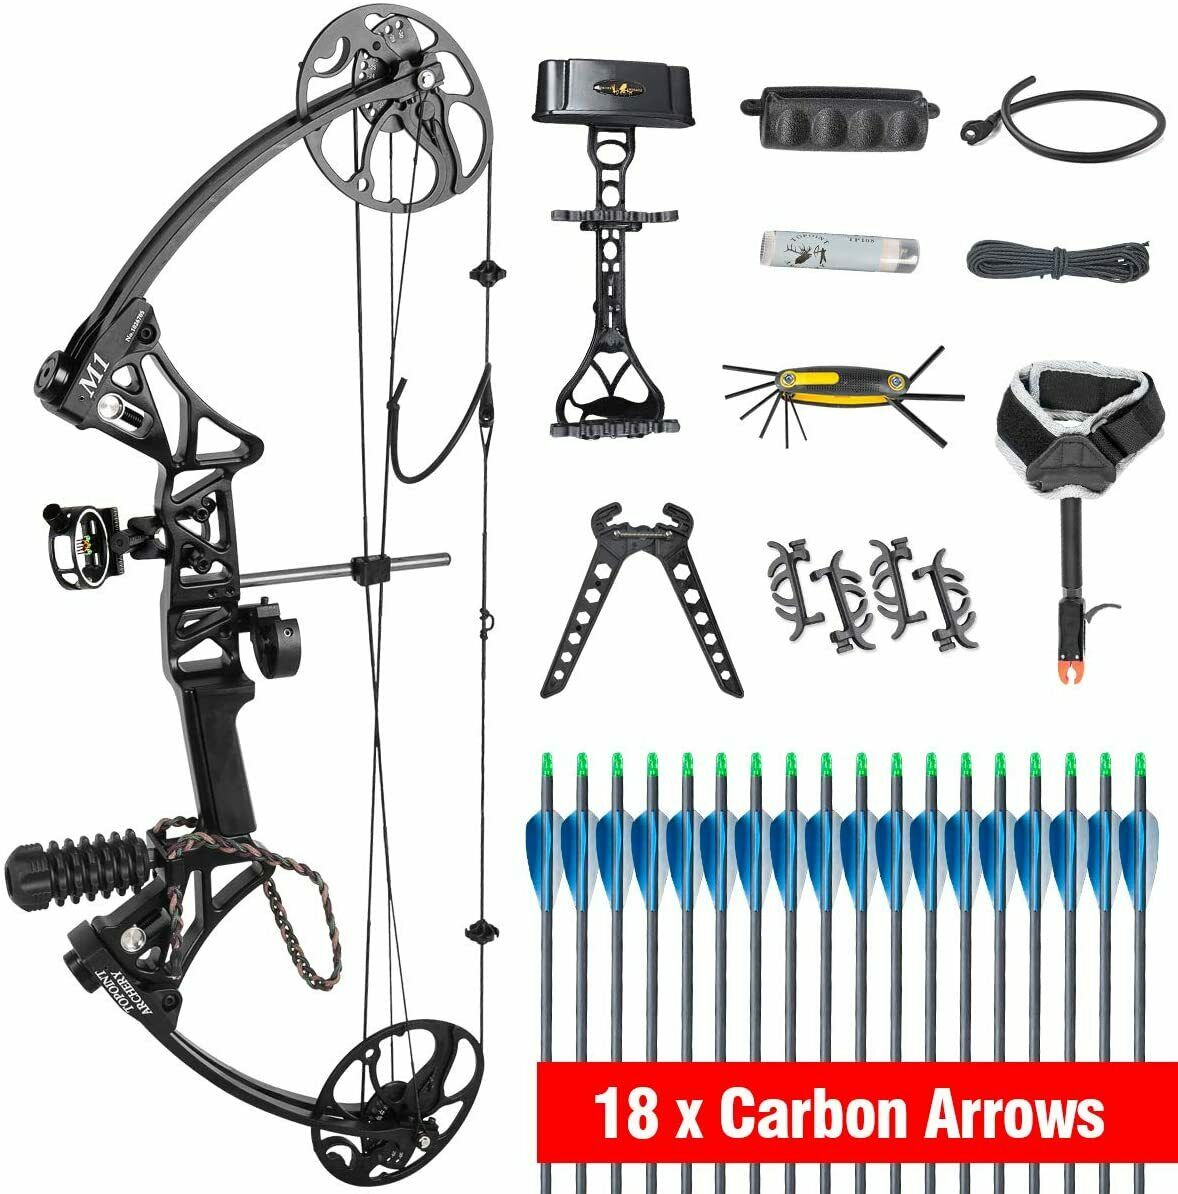 TOPOINT M1 15-70LB COMPOUND BOW & ARROW HUNTING TARGET ARCHERY CNC DUAL CAM